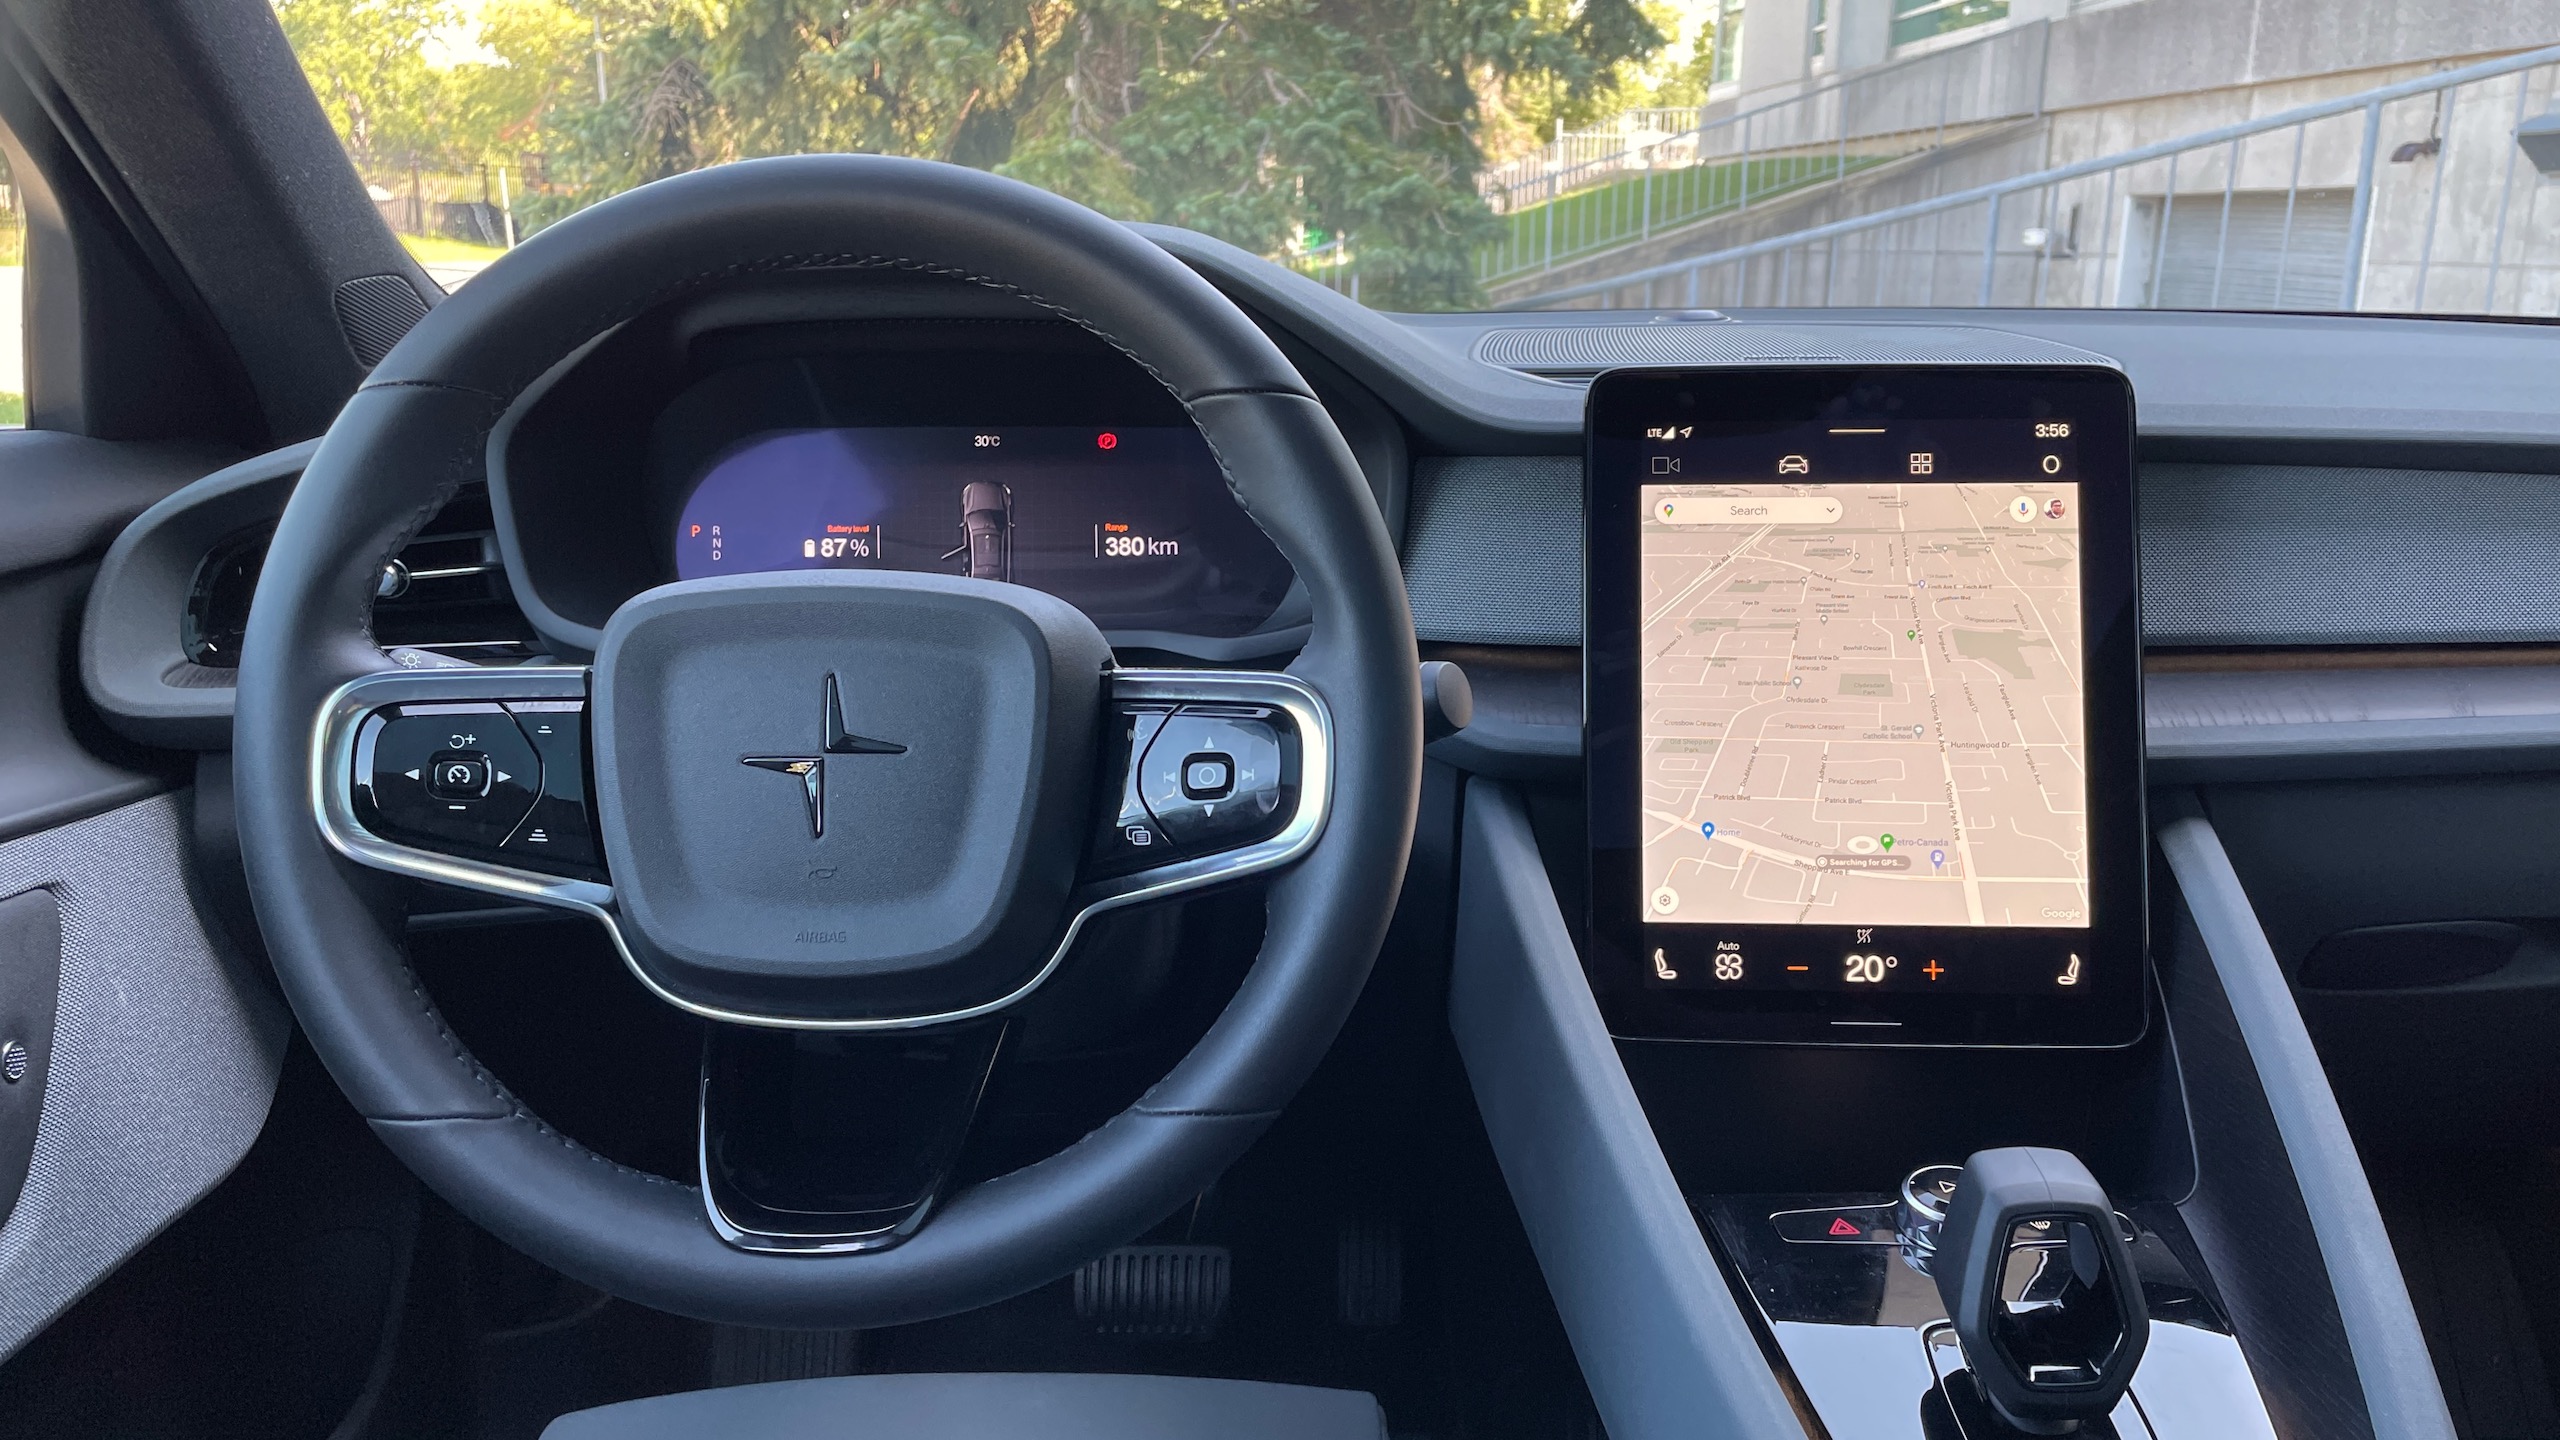 Android Automotive OS: Pros and Cons to navigate the road ahead